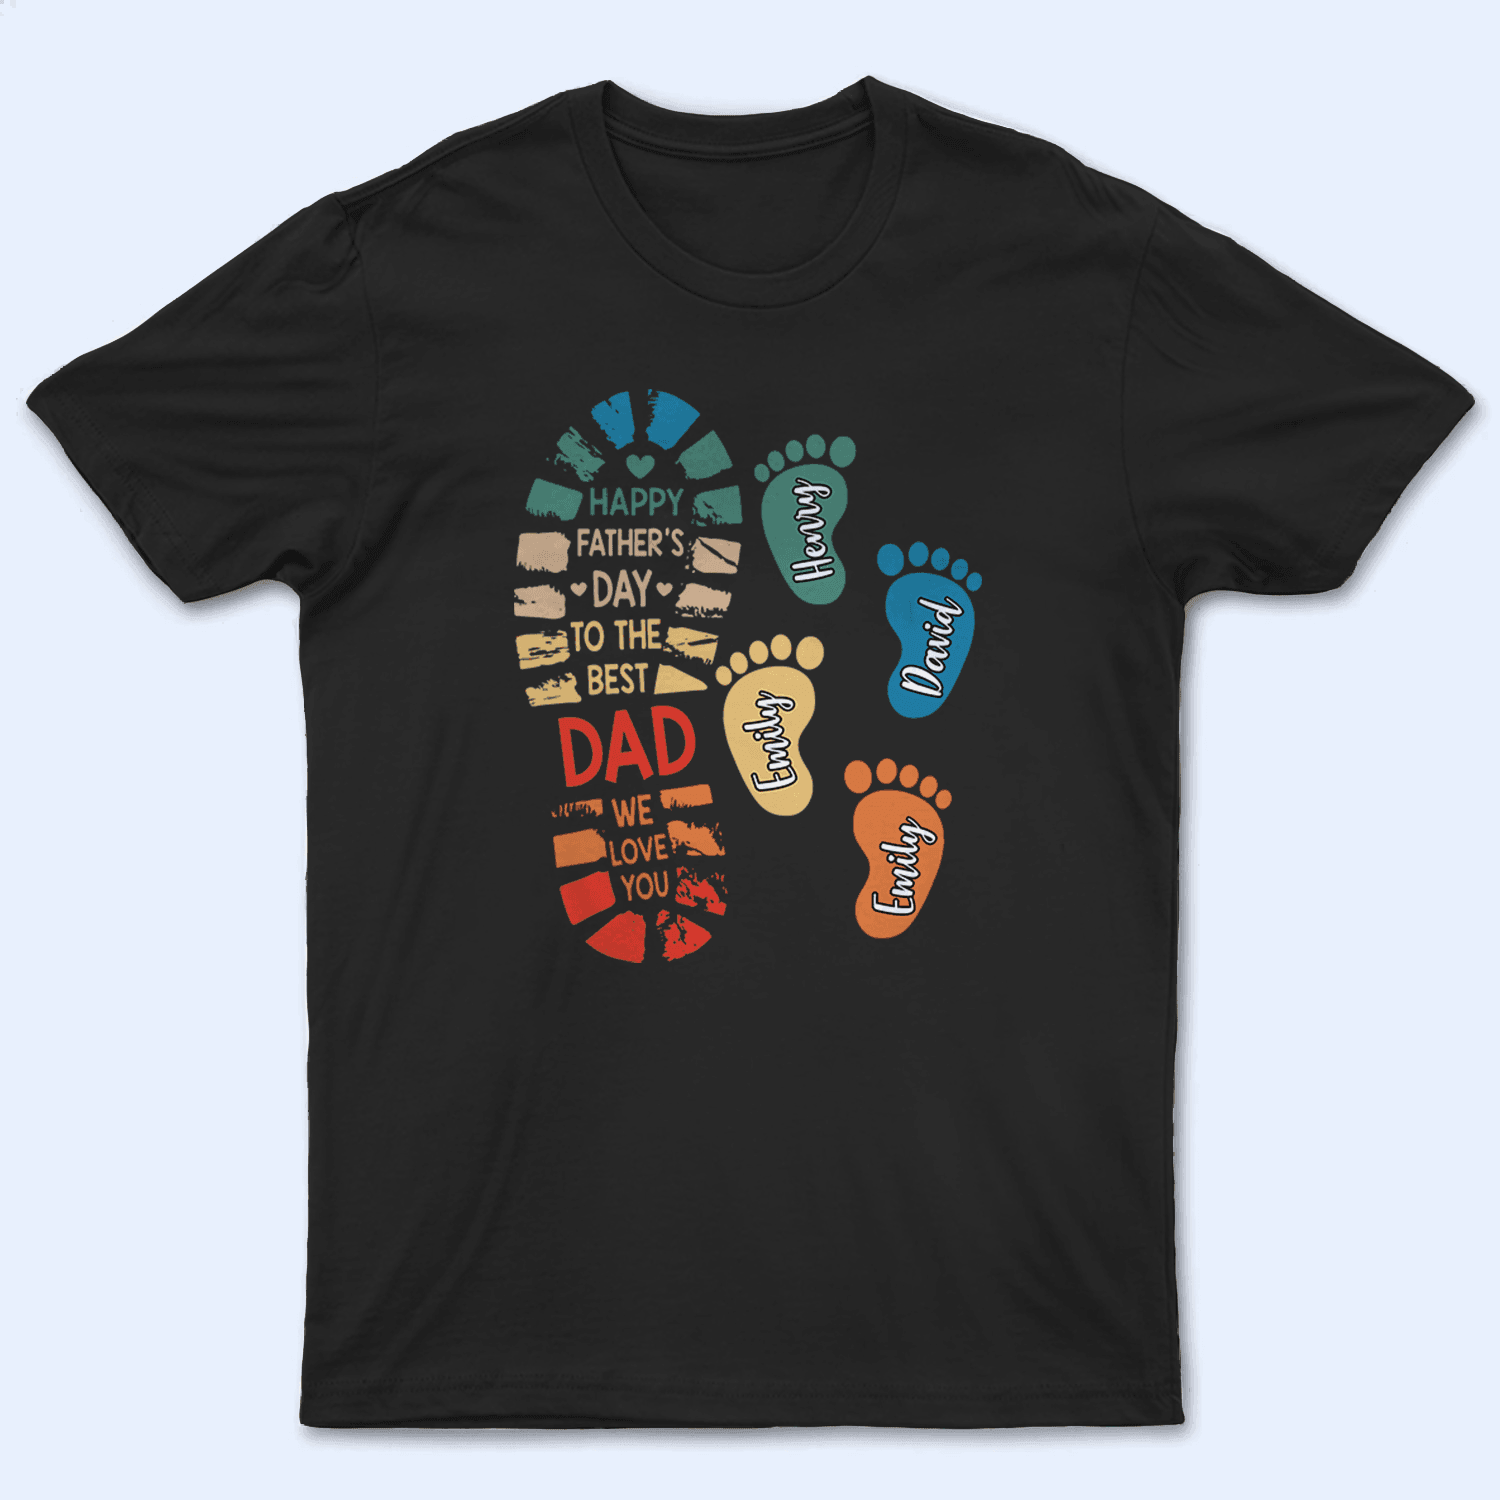 Vintage Fathers and Childs Footprints - Personalized Custom T Shirt - Birthday, Loving, Funny Gift for Grandfather/Dad/Father, Husband, Grandparent - Suzitee Store